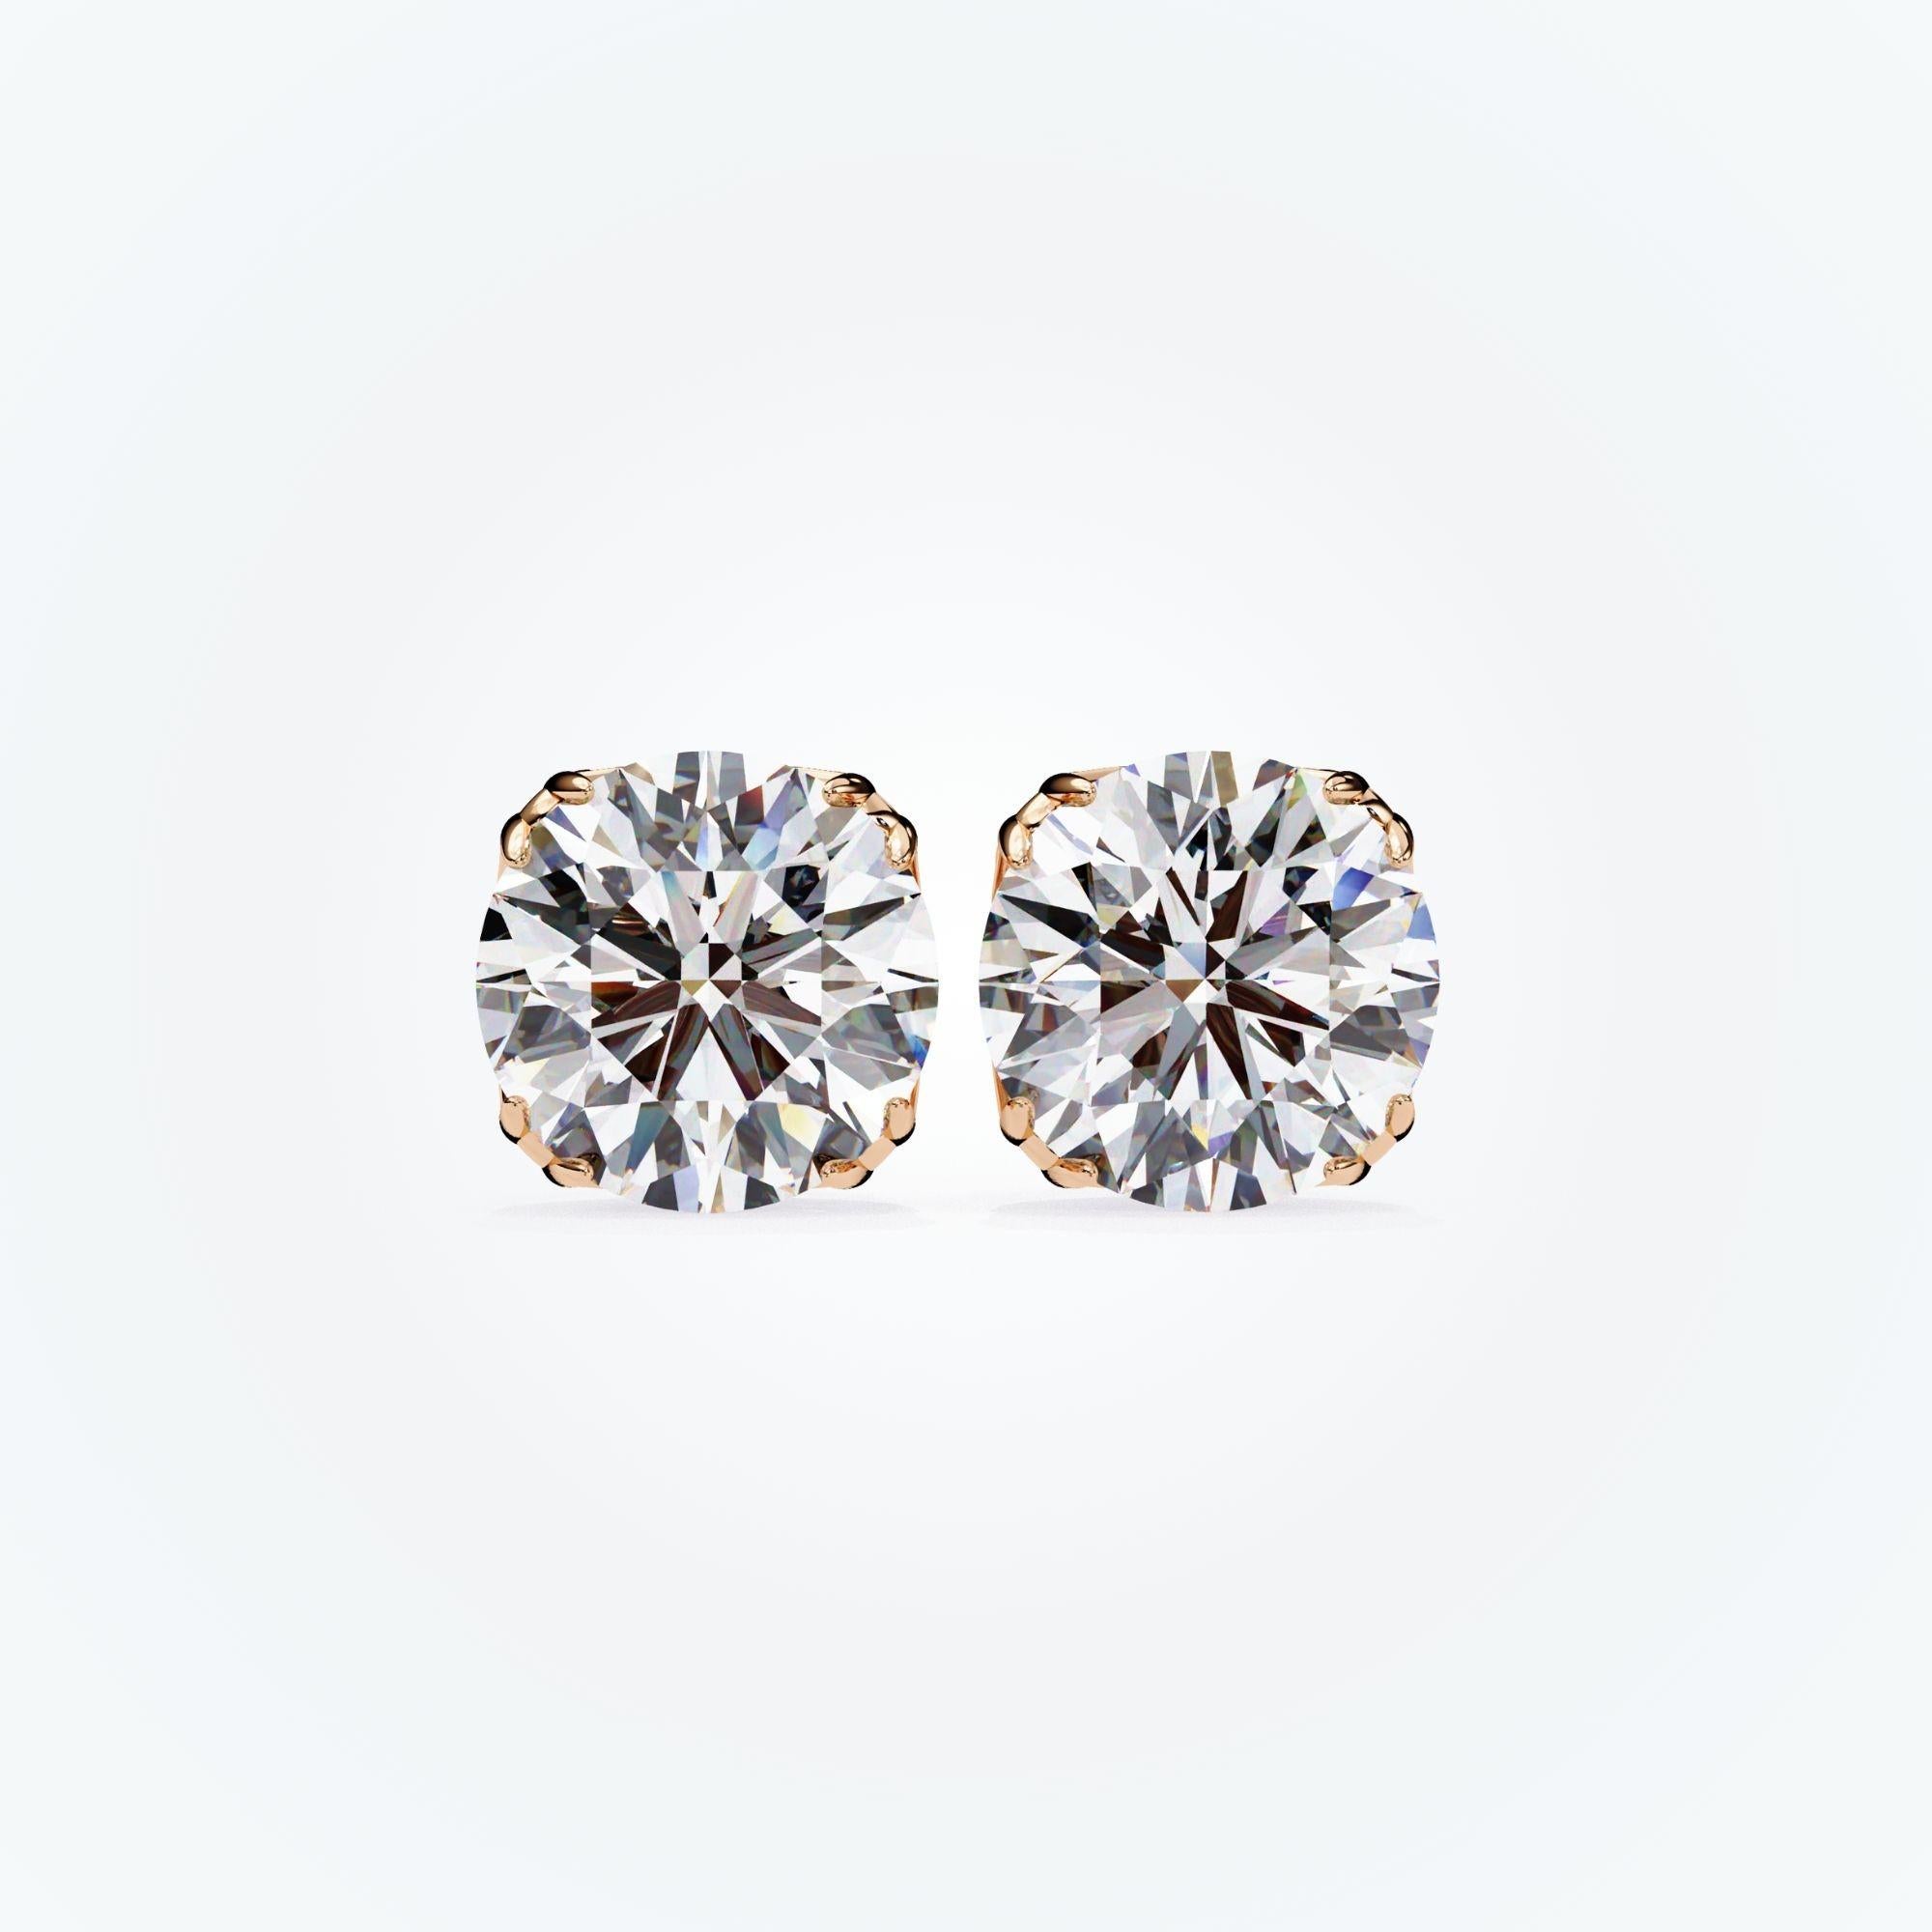 Natural Diamond Studs, Floral, 8 Prongs, 1/2 carat total weight, 14K Solid Gold For Sale 9